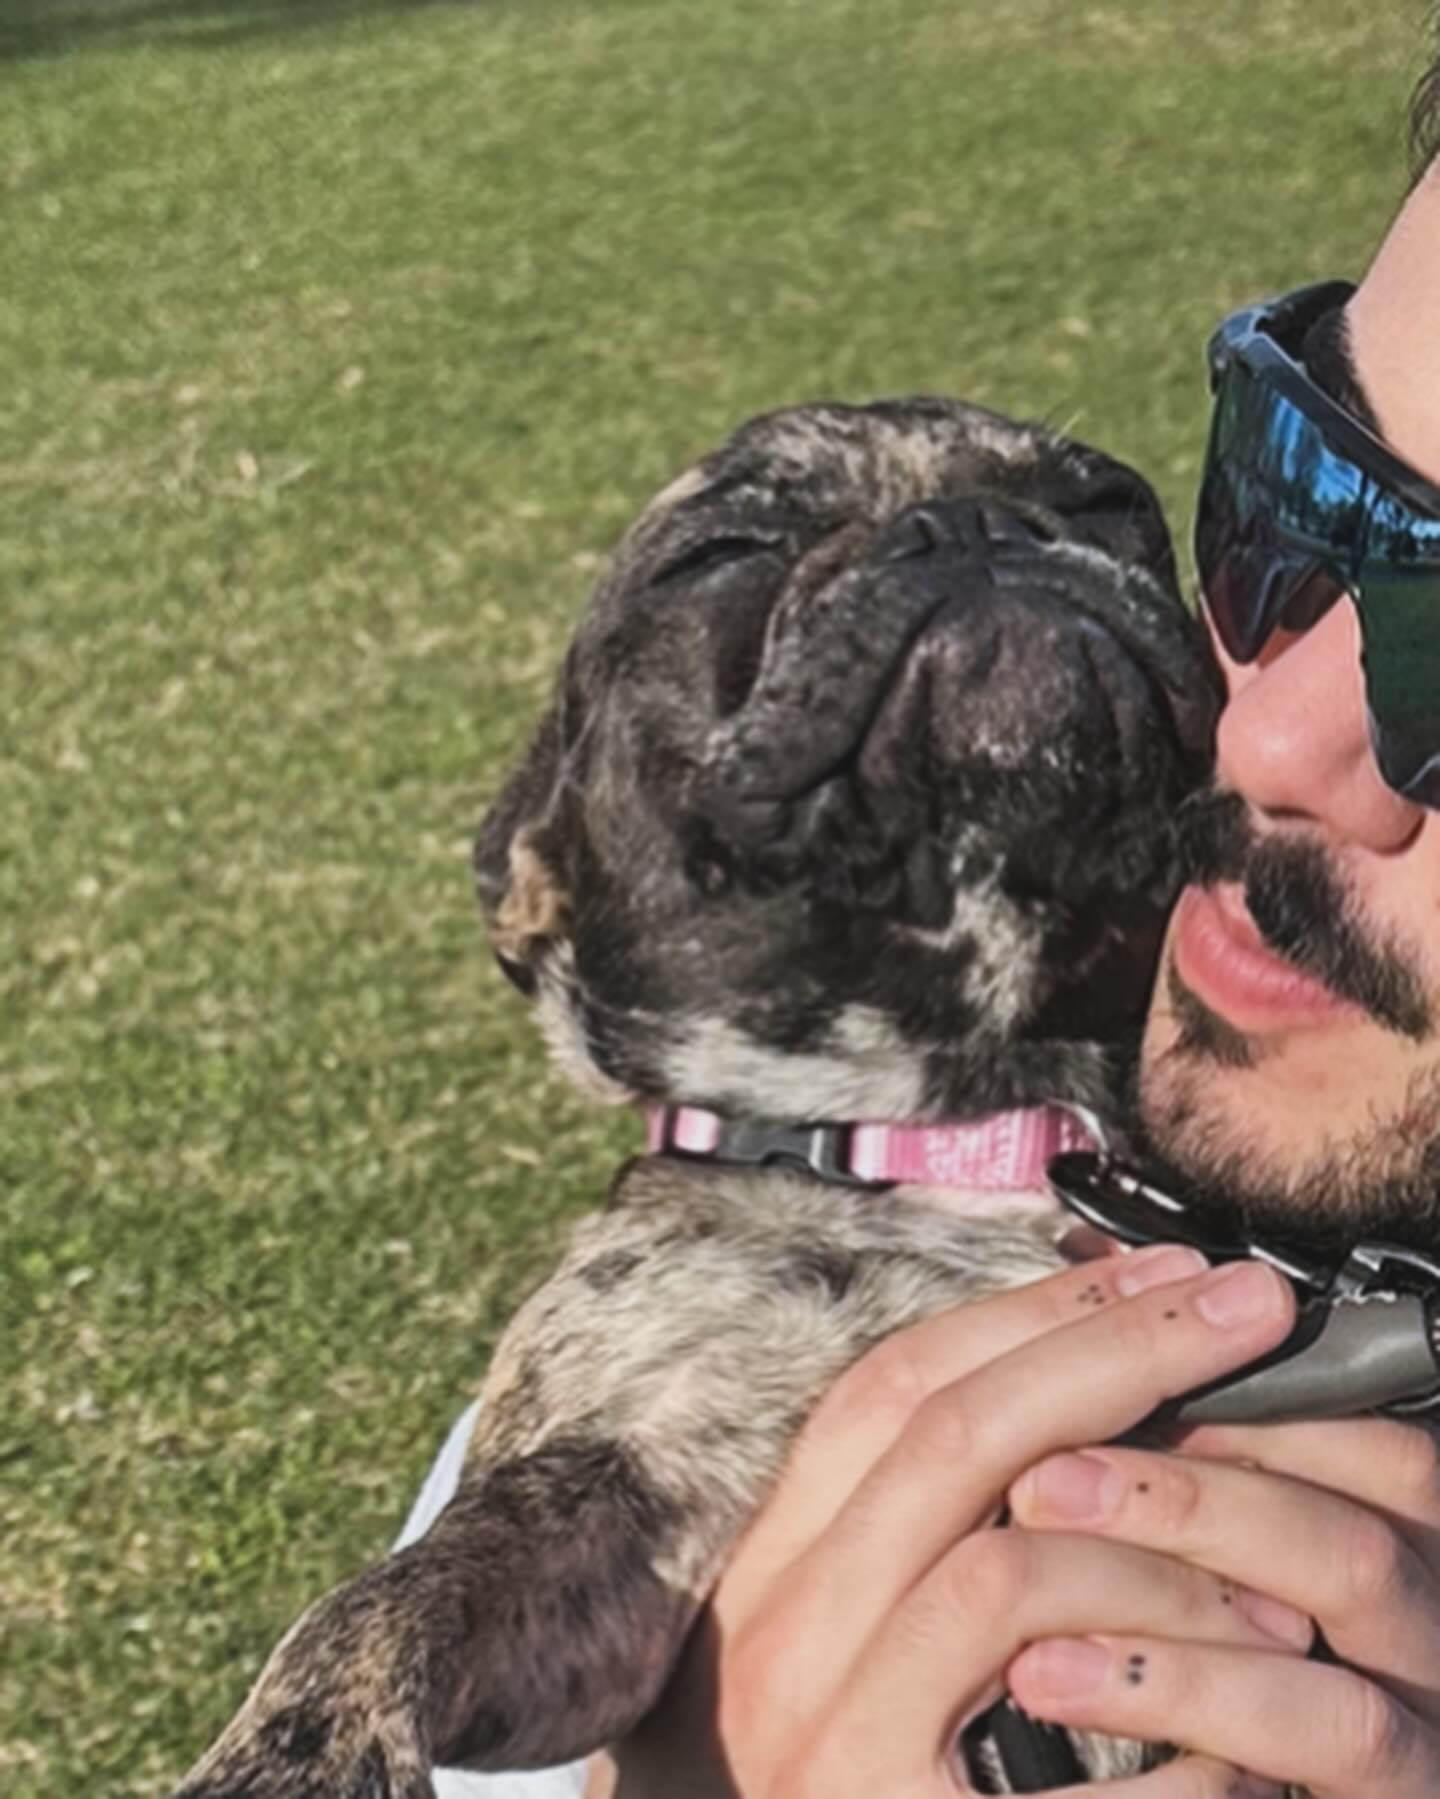 Let it be known I *will* kiss your dog on the mouth
•
•
•
•
•
•
#doglover #woof #scruffy #beard #spring #chicago #xyzbca #fyp #explore #lakeside #cuddles